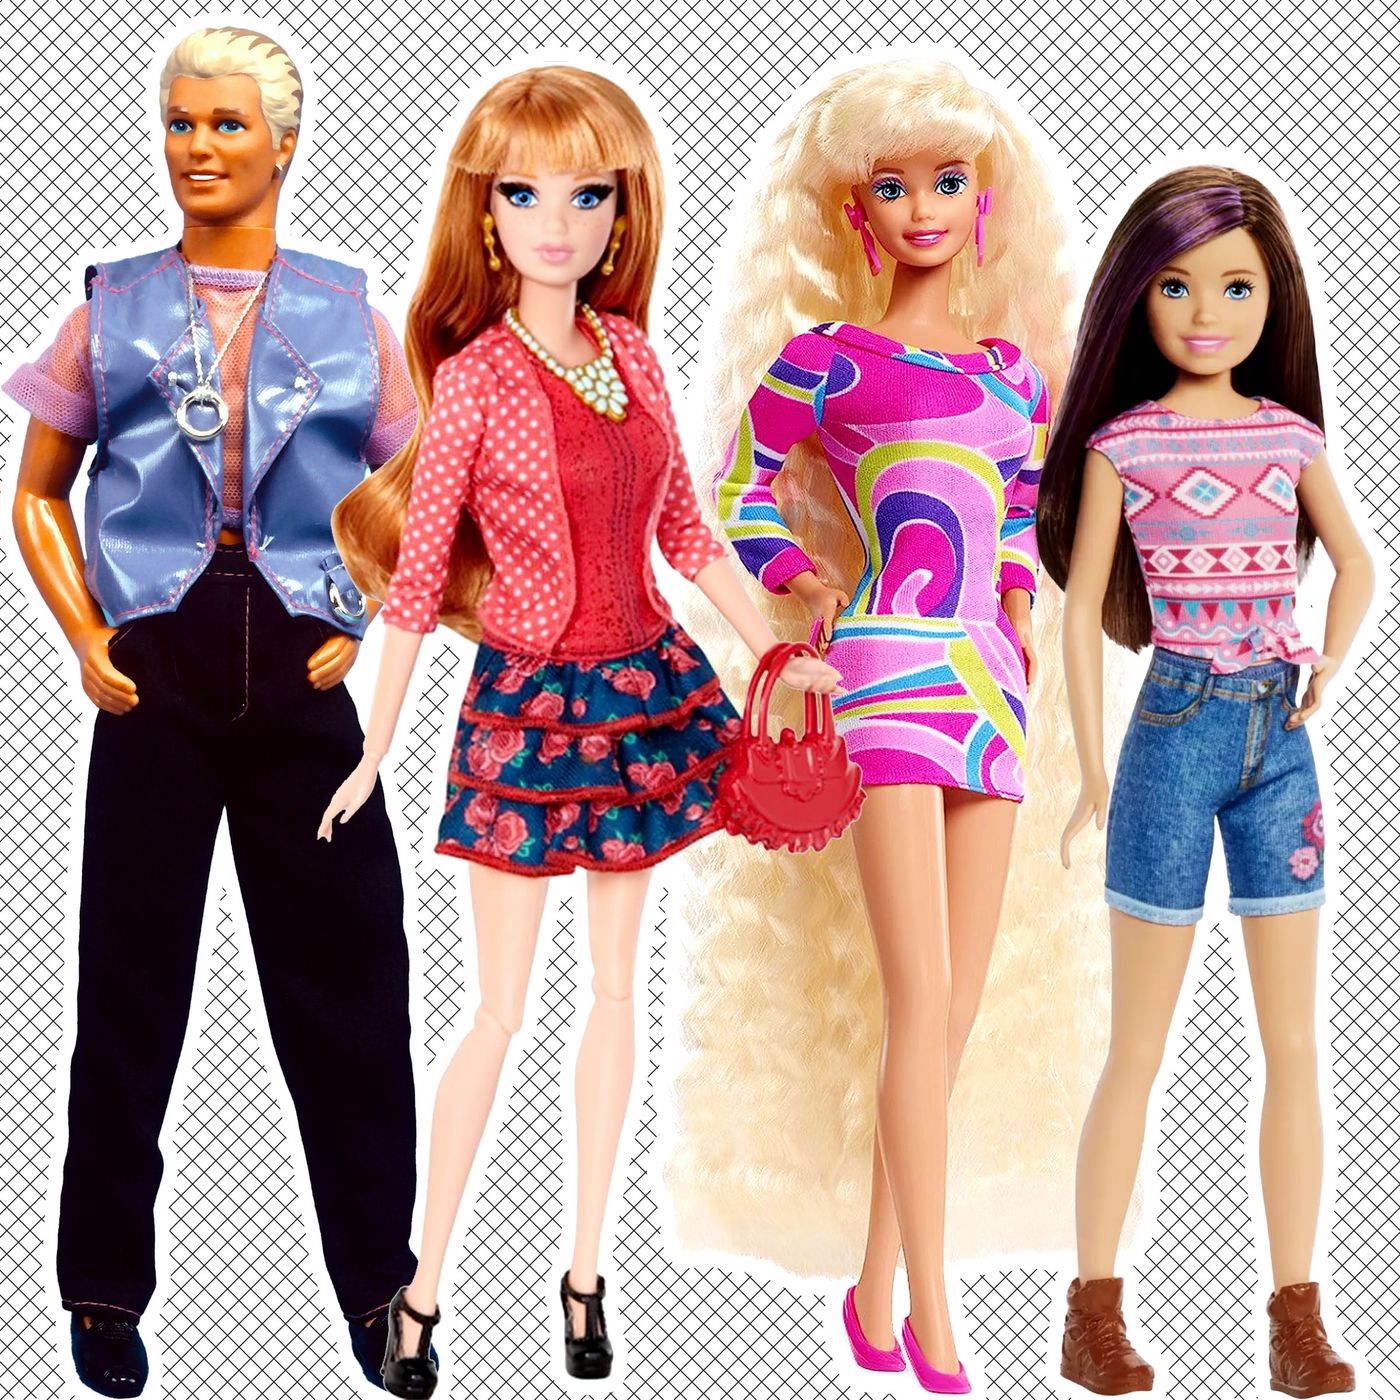 Barbie Made to Move Barbie Doll, Blue Top and Made to Move Barbie Doll,  Pink Top Bundle